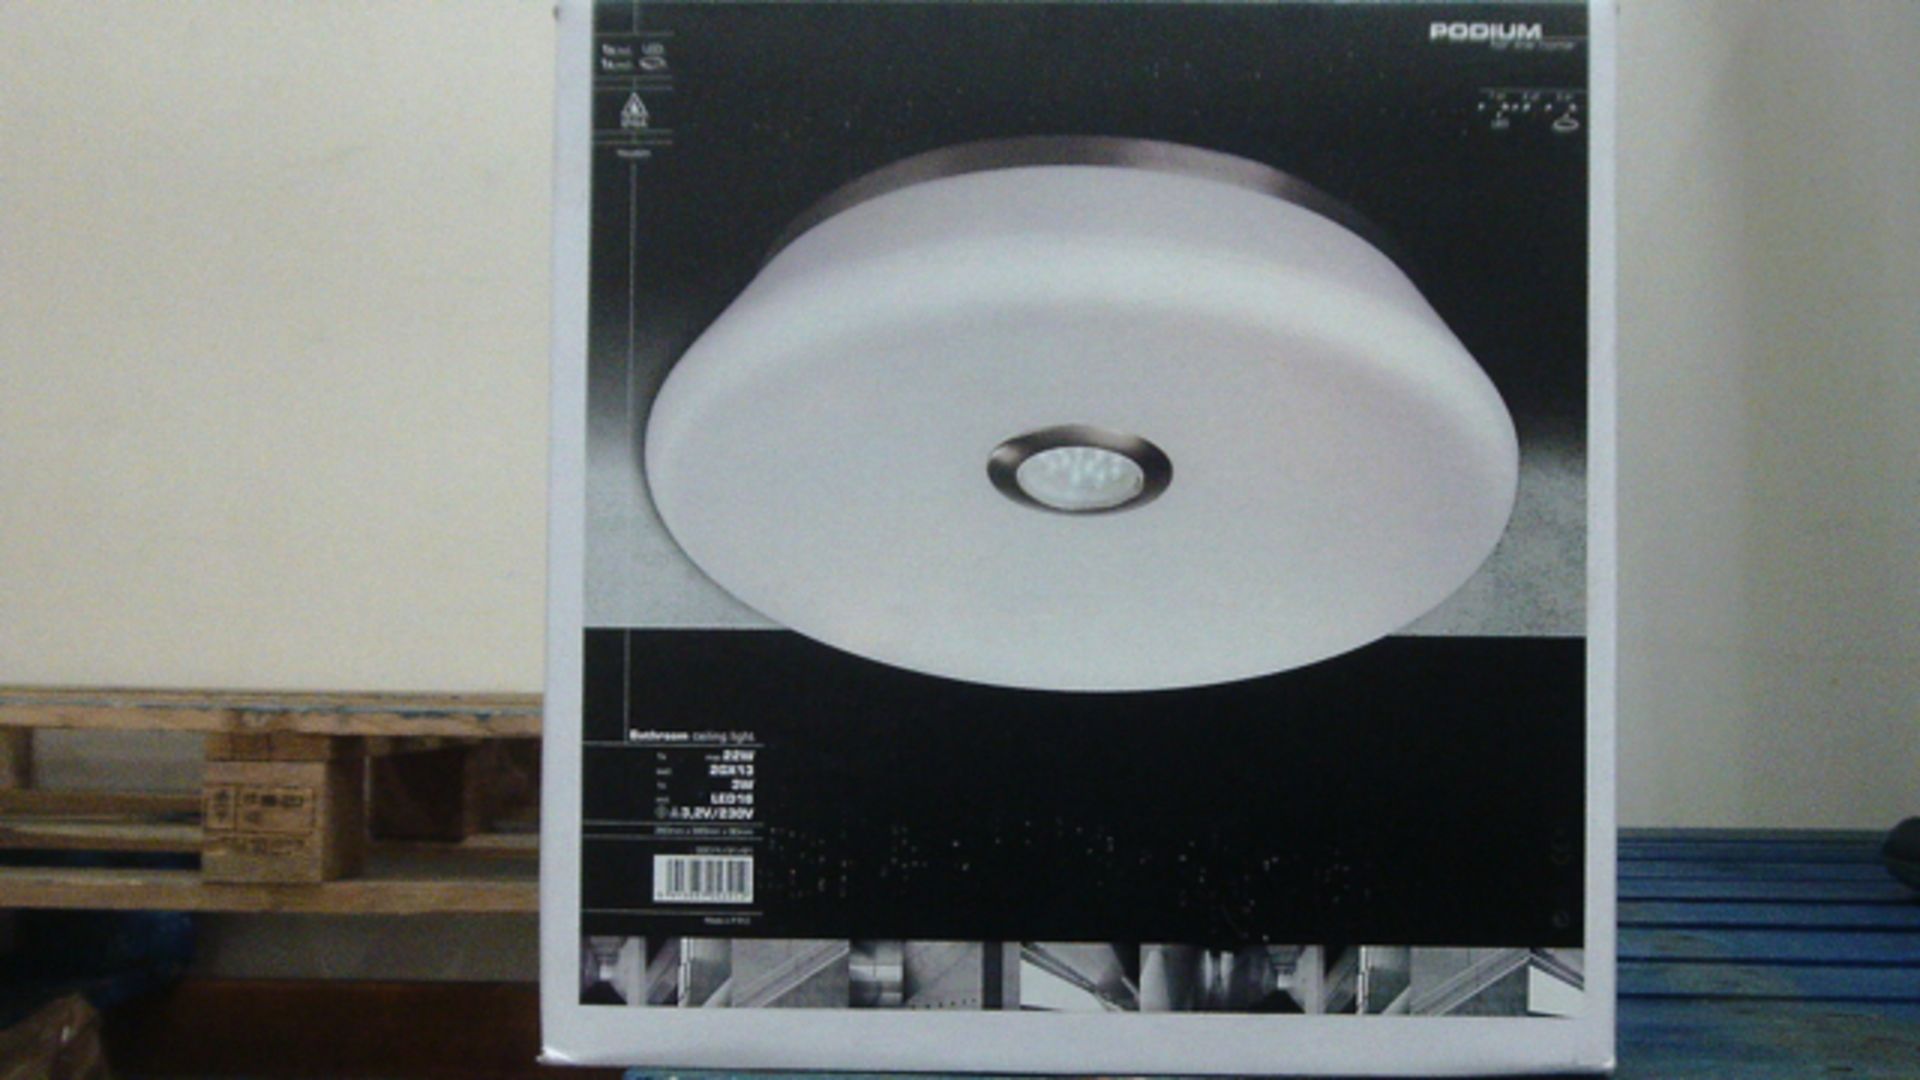 1pc x Brand new Philips Podium Houston Bathroom ceiling light - IP 44 rated includes bulb - rrp £139